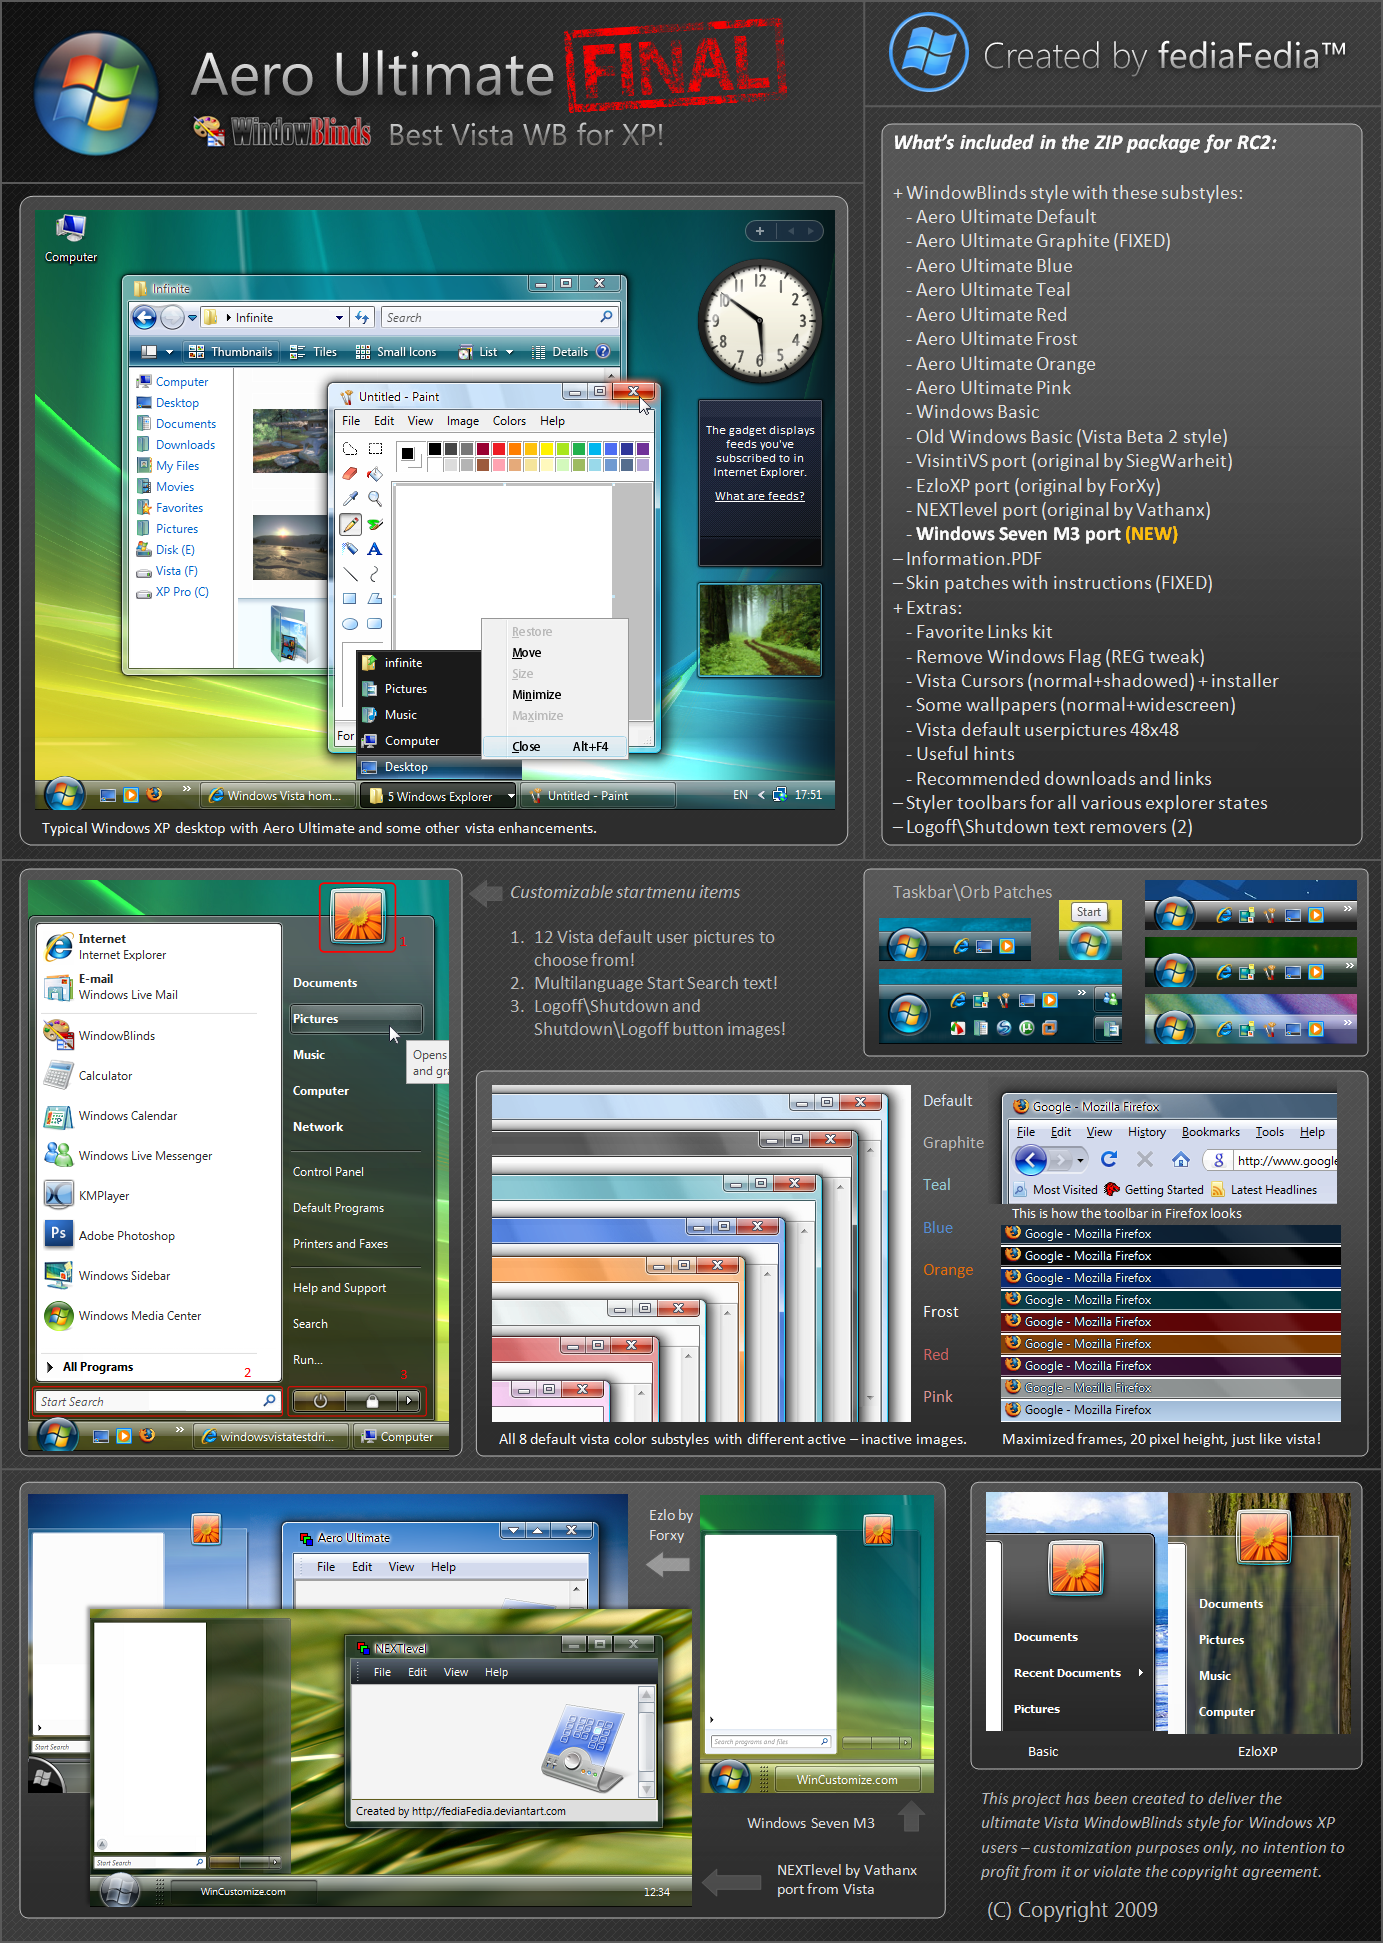 DOWNLOAD INCREDIBLE WINDOWS 7 THEMES WITH WINDOWBLINDS | WEB TALK